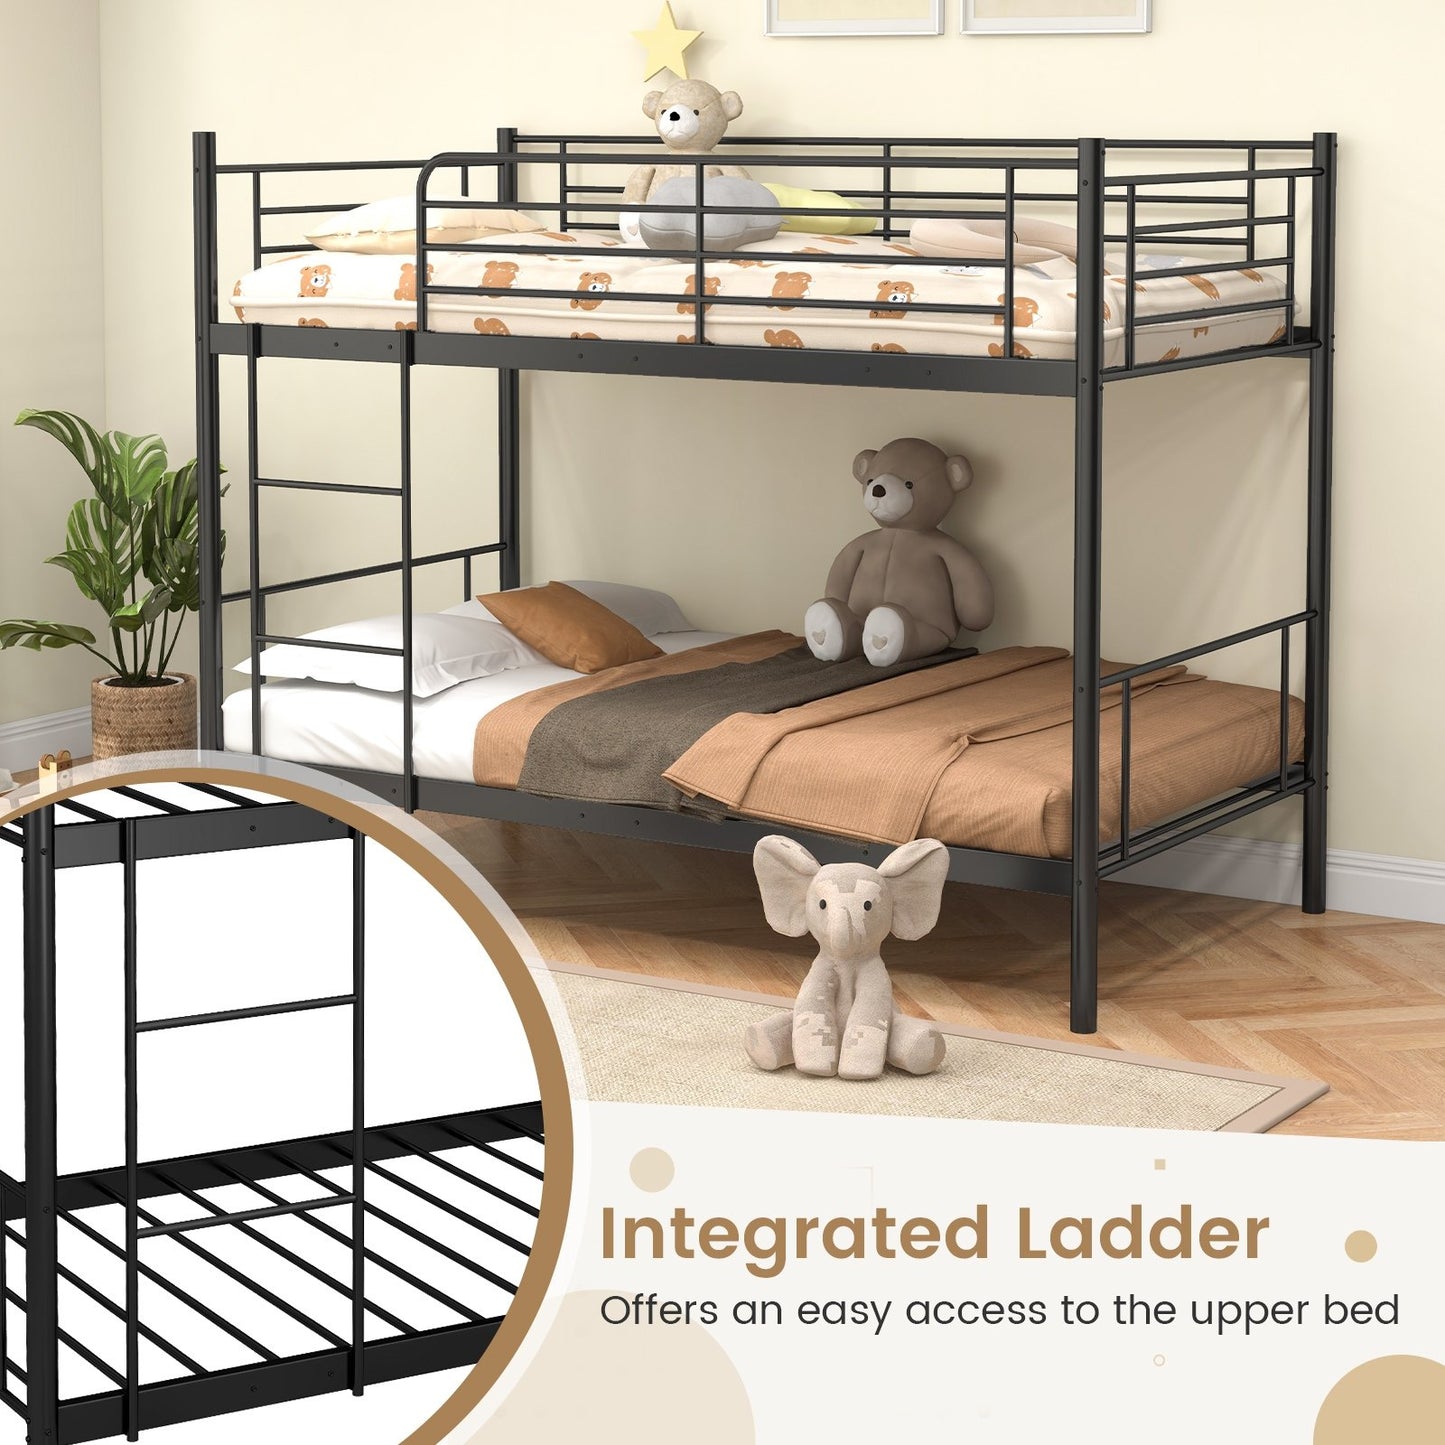 Metal Bunk Bed with Ladder and Full-length Guardrails, Black